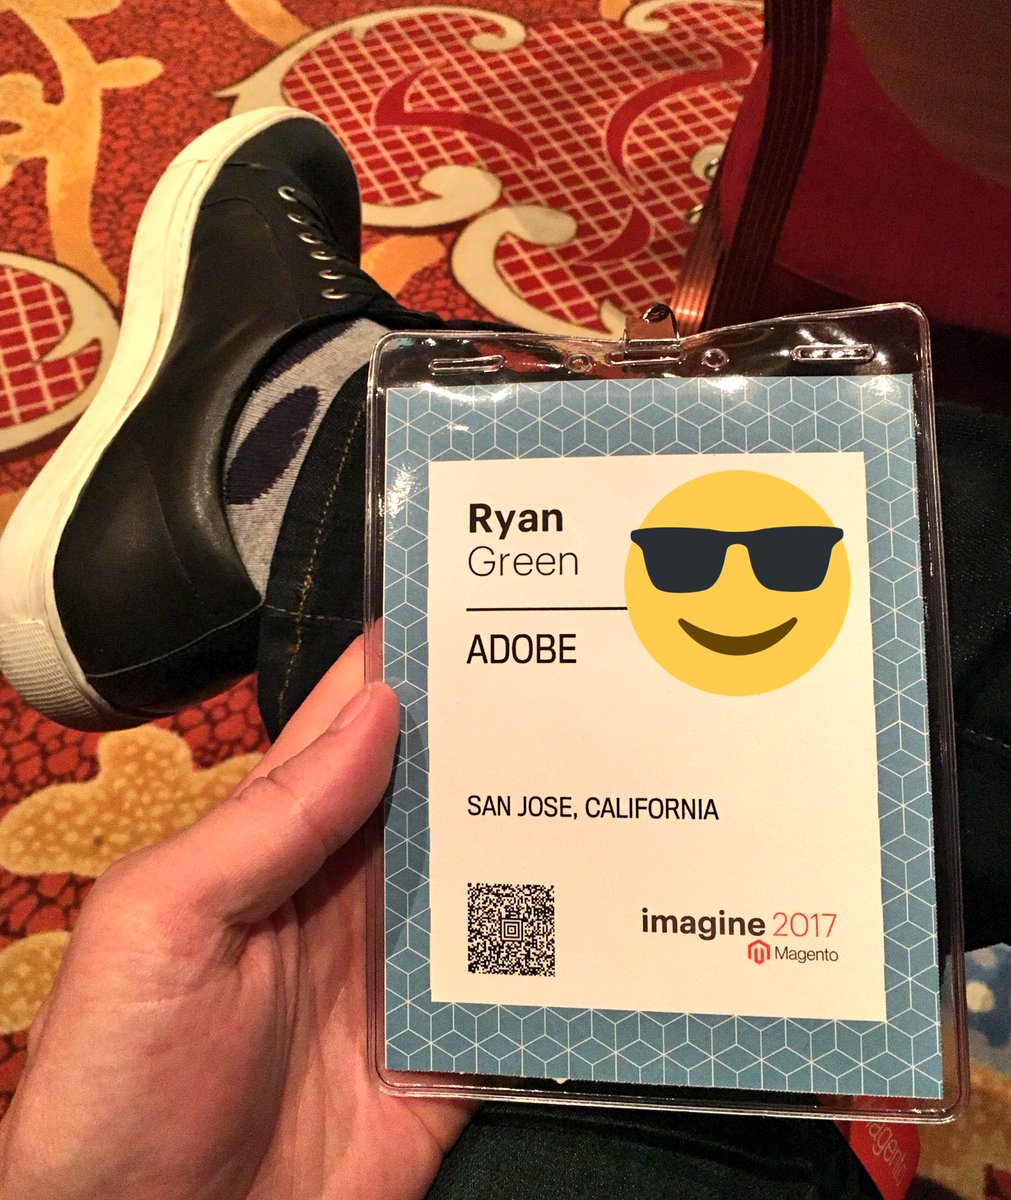 Greener250: Let's do this! Excited for my first #Magentoimagine ... @peter_sheldon let's catch up https://t.co/51g5sBsGy4